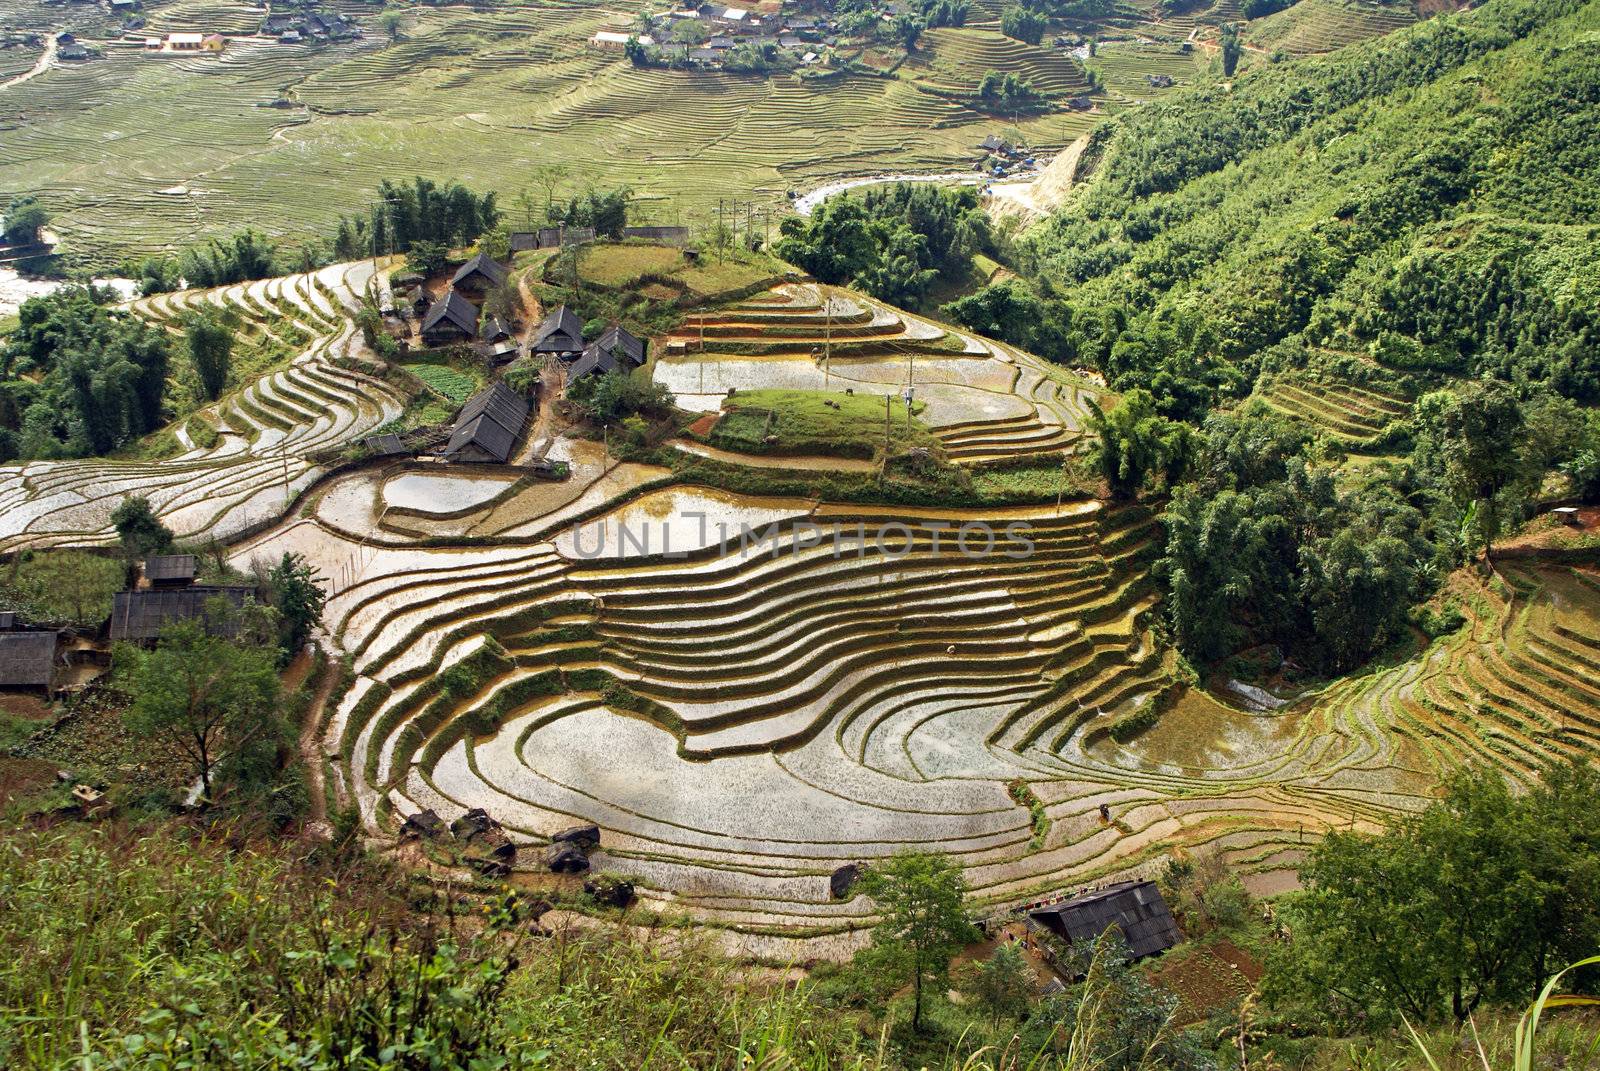 Typical landscape in the highlands of north Vietnam